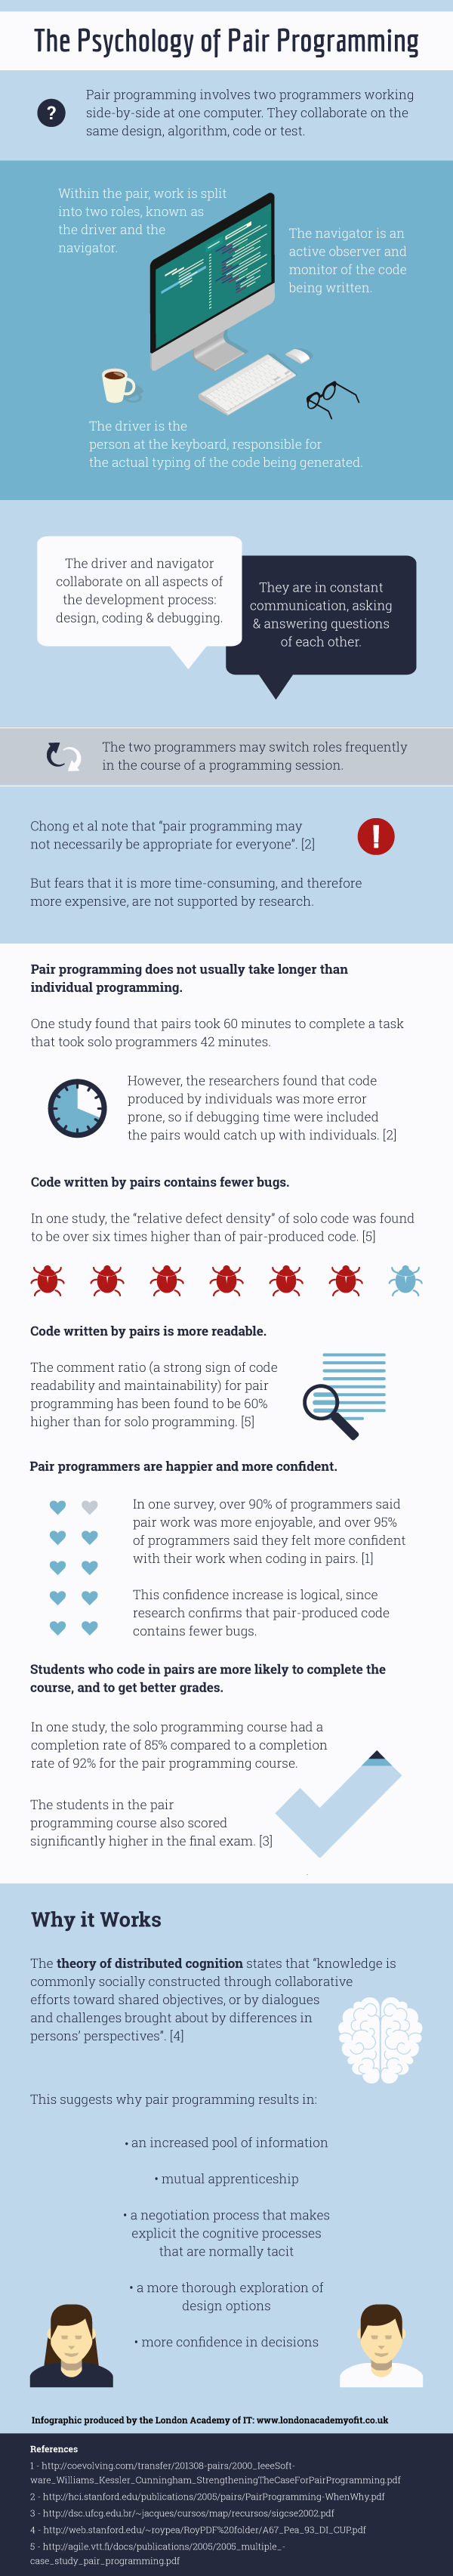 This infographic explains why pair programming can improve performance, confidence and happiness in programmers.